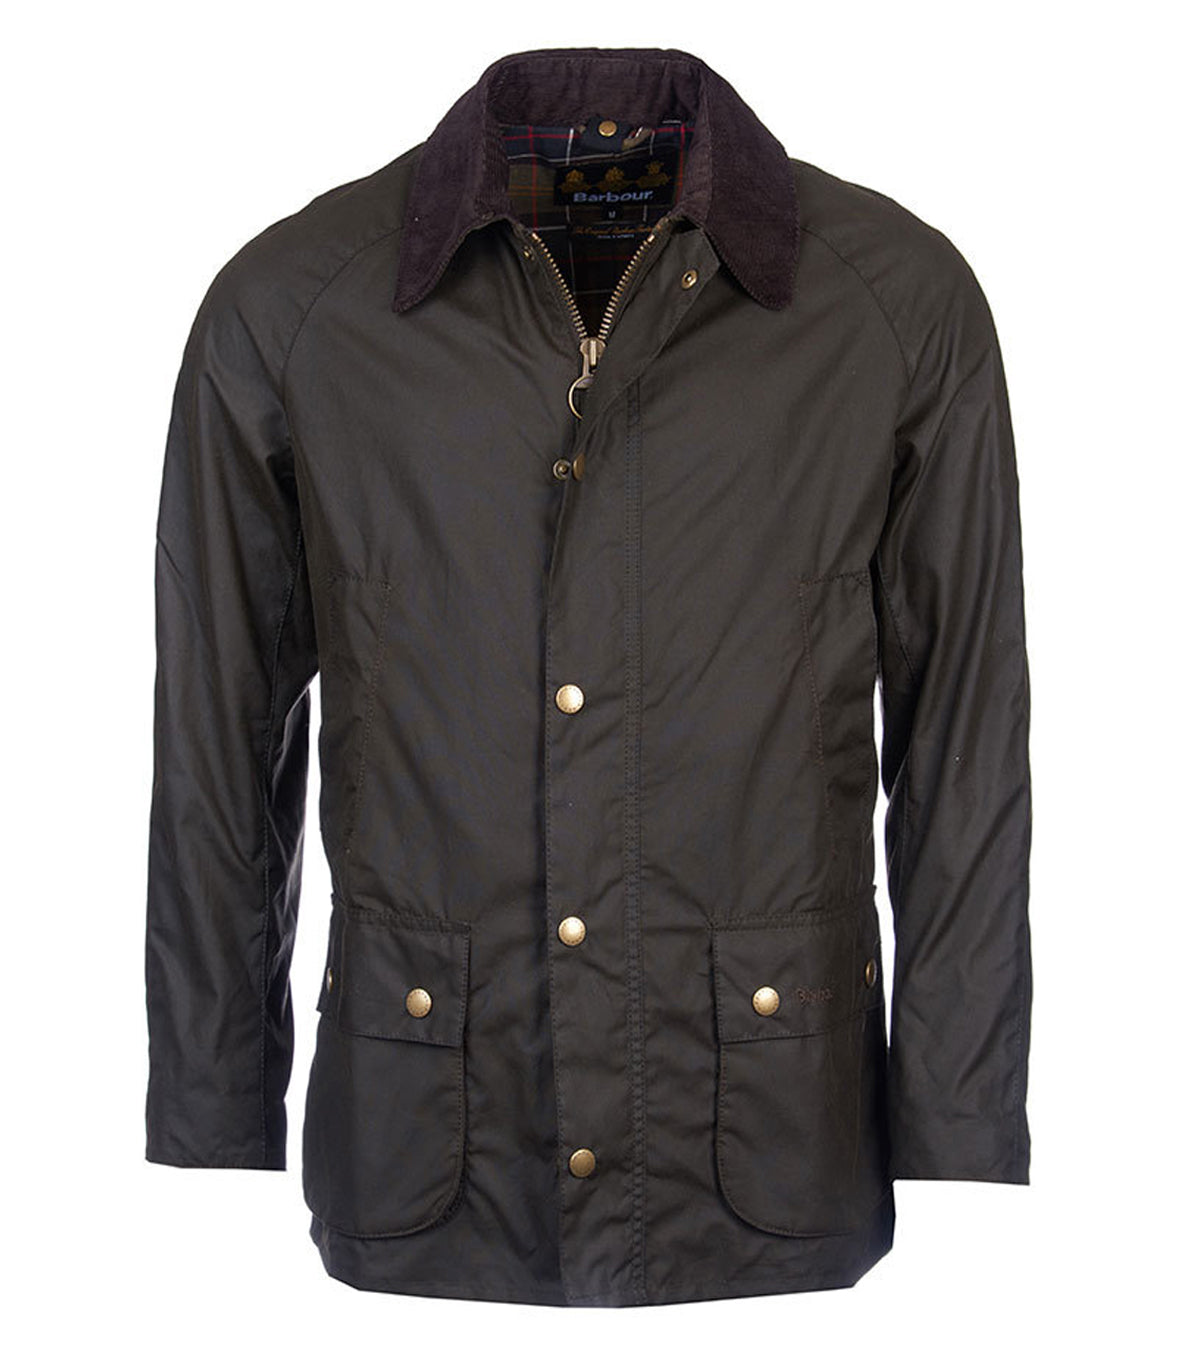 Barbour Ashby Waxed Jacket - SALE - North Shore Saddlery